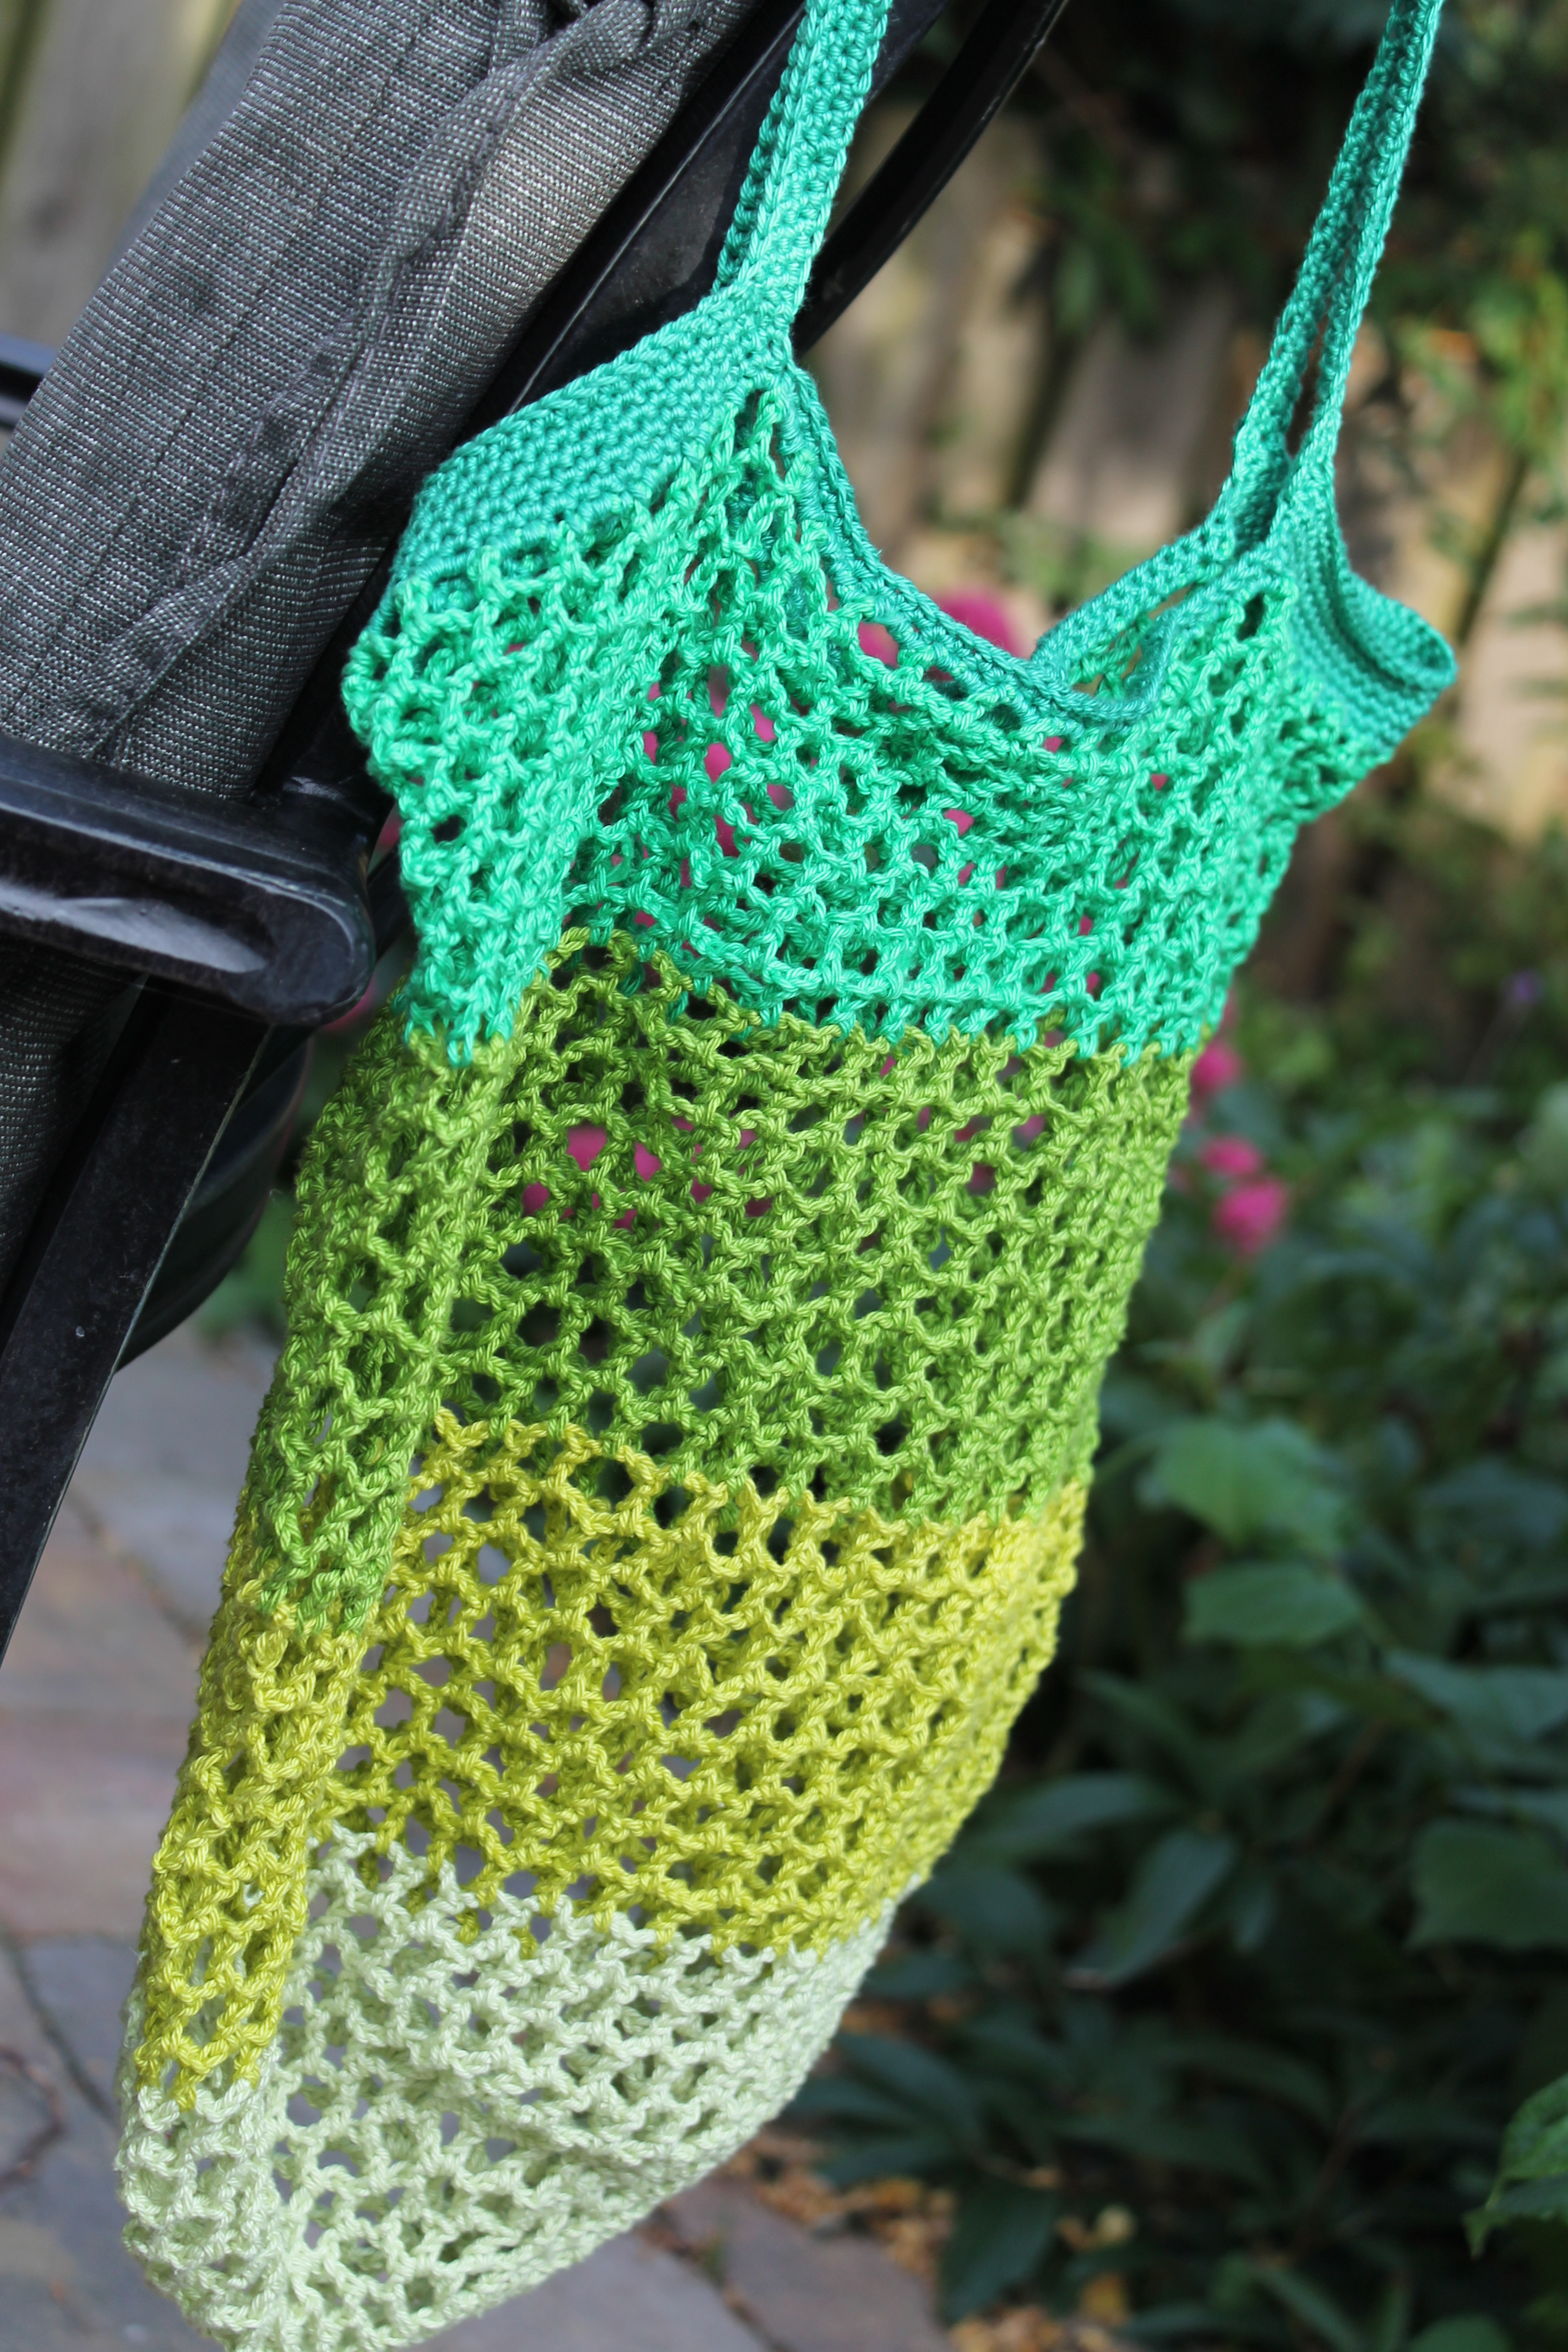 Crochet Bag Pattern The Granny Smith Market Bag Free Pattern And Tutorial Missneriss